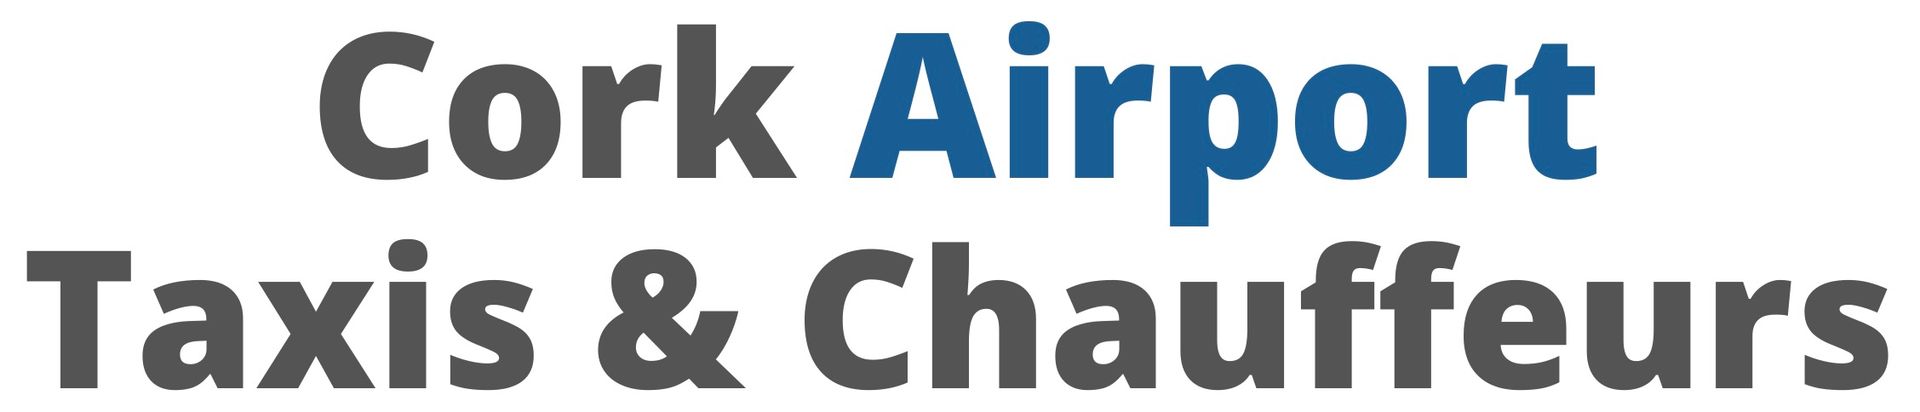 a logo for cork airport taxis and chauffeurs